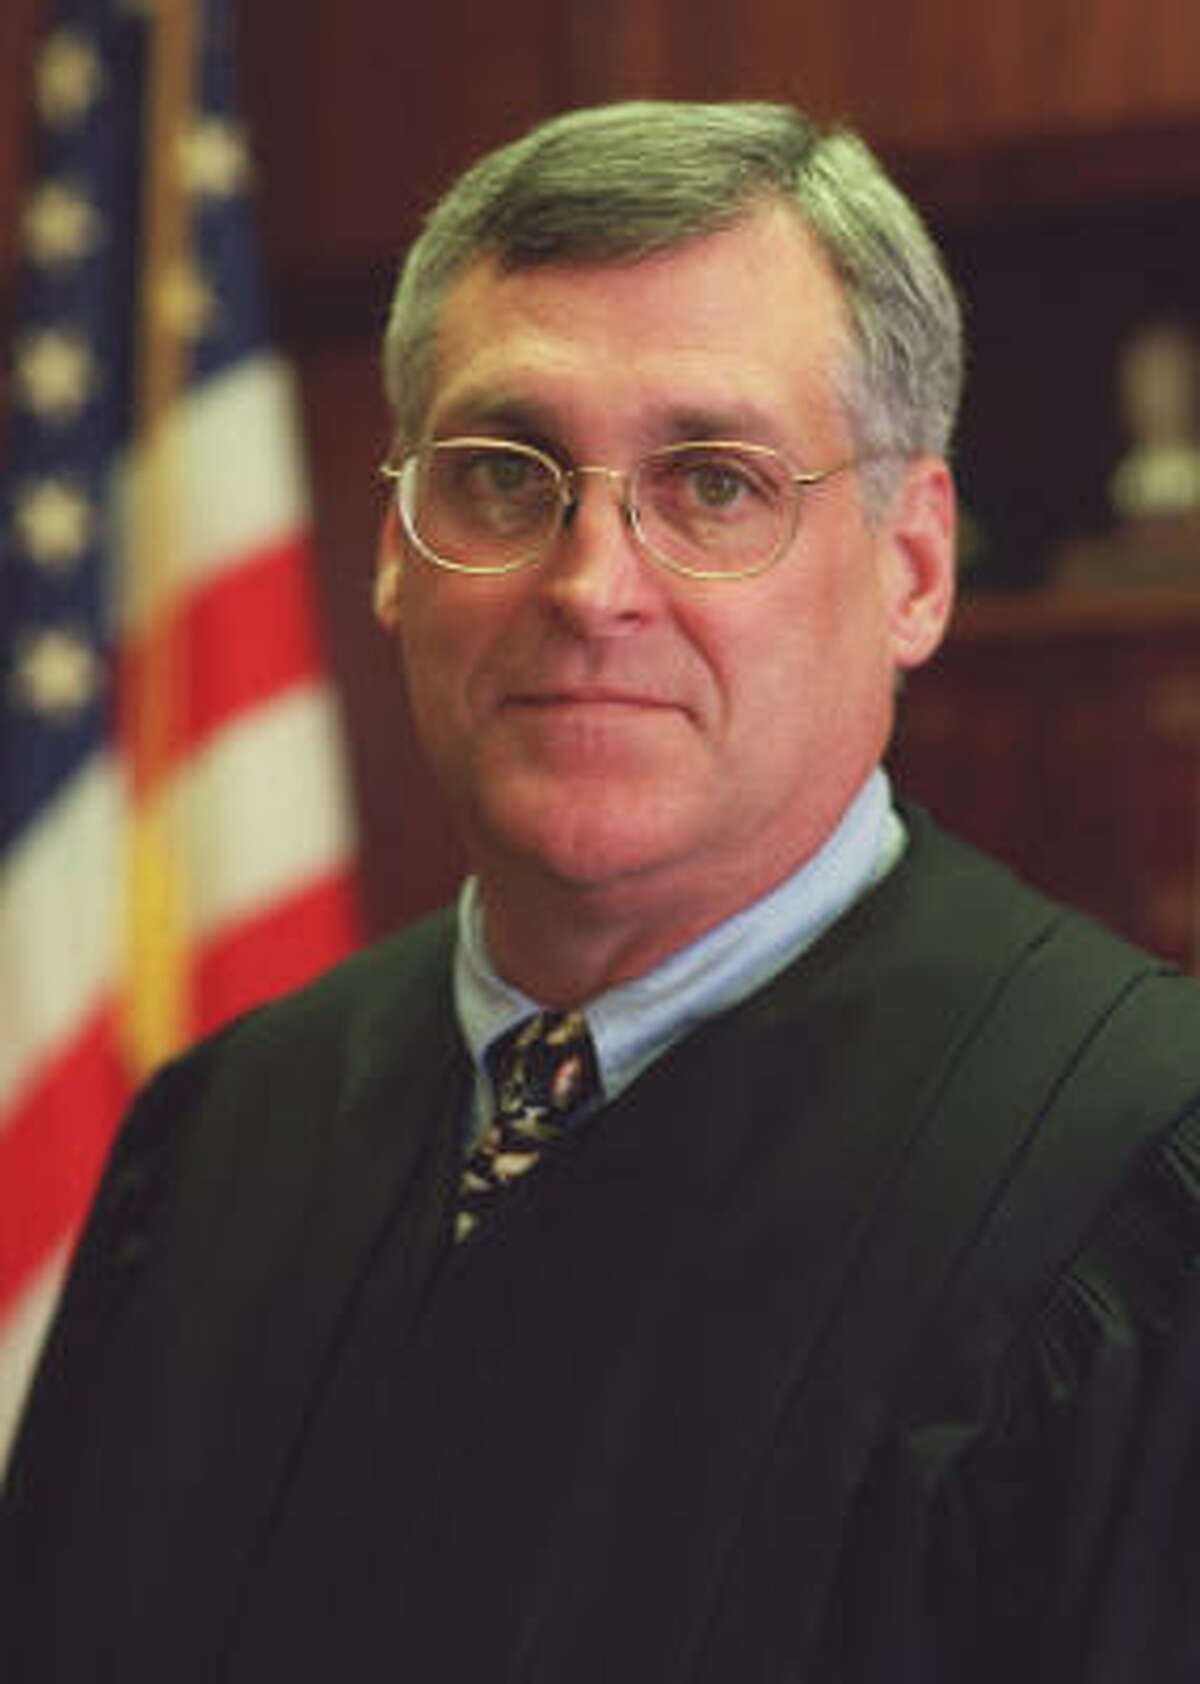 U.S. Federal District Judge Sam Kent, shown in 2001, is accused of harassing and inappropriately touching his 49-year-old case manager in his chambers in March.